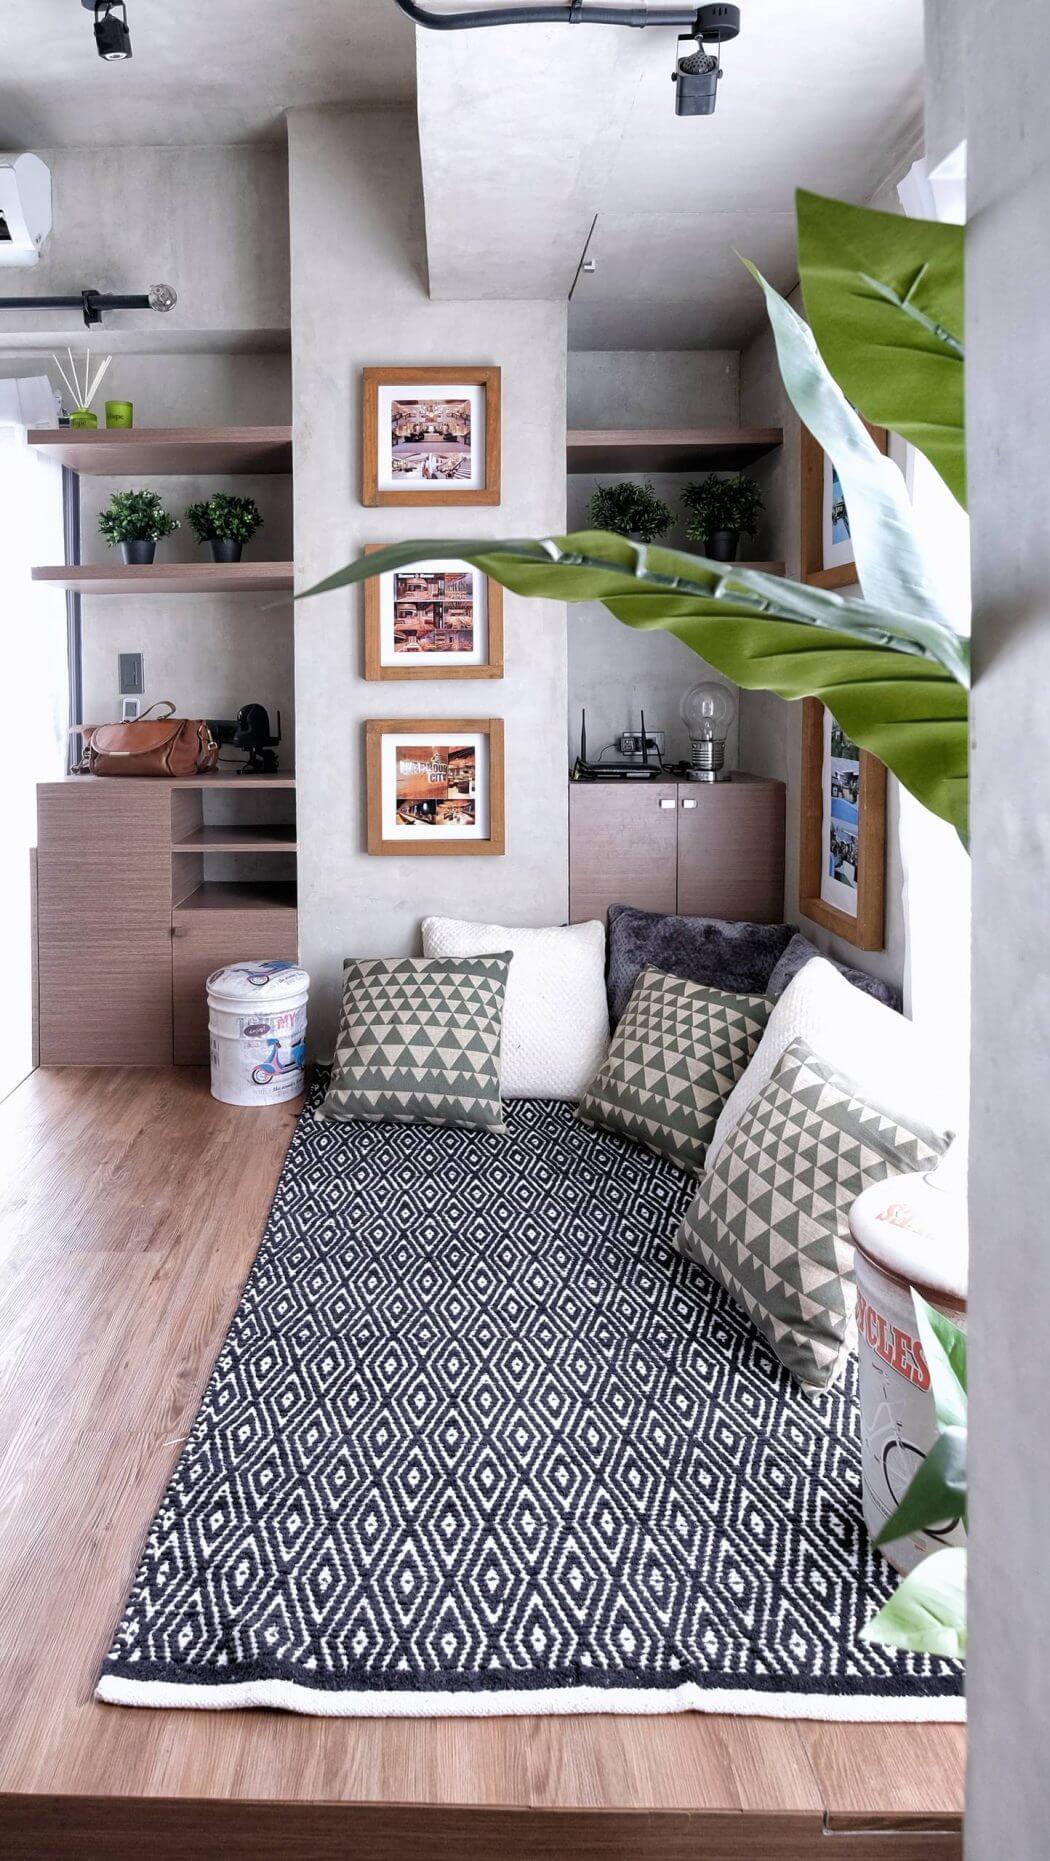 A cozy and modern living space with geometric patterned rug, wooden shelves, and lush greenery.